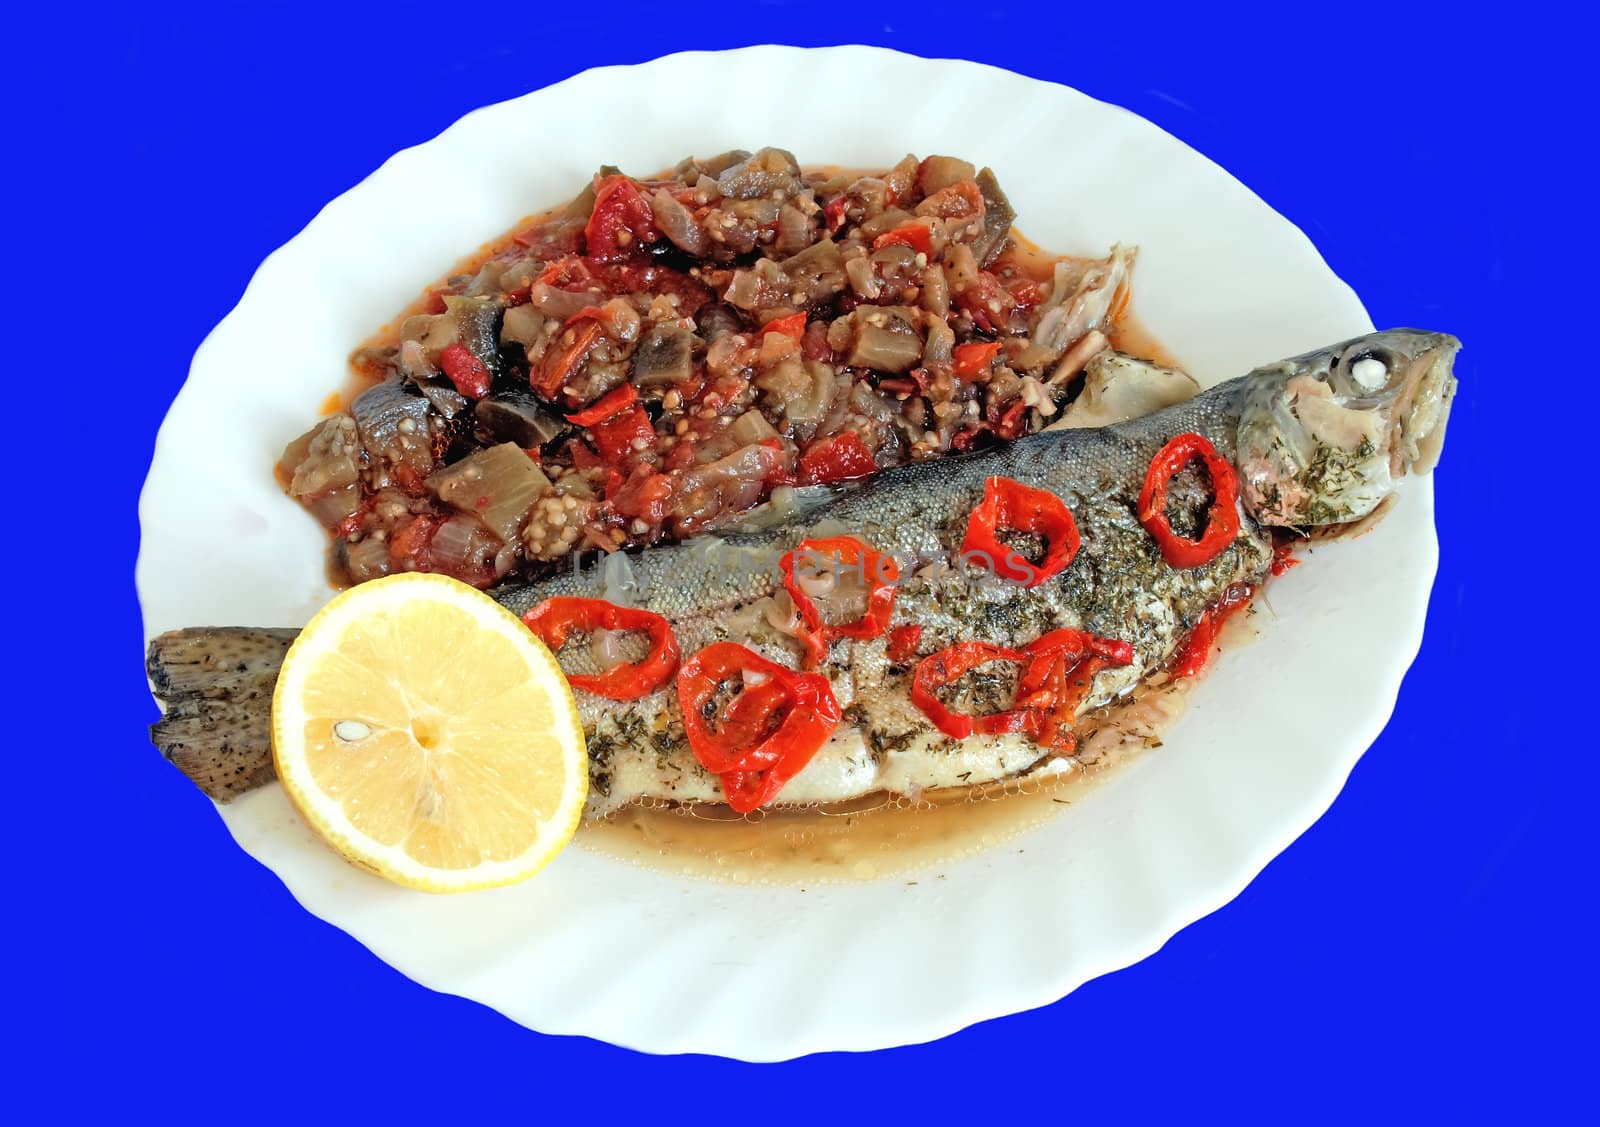 Baked fish with stuffed vegetables over blue background